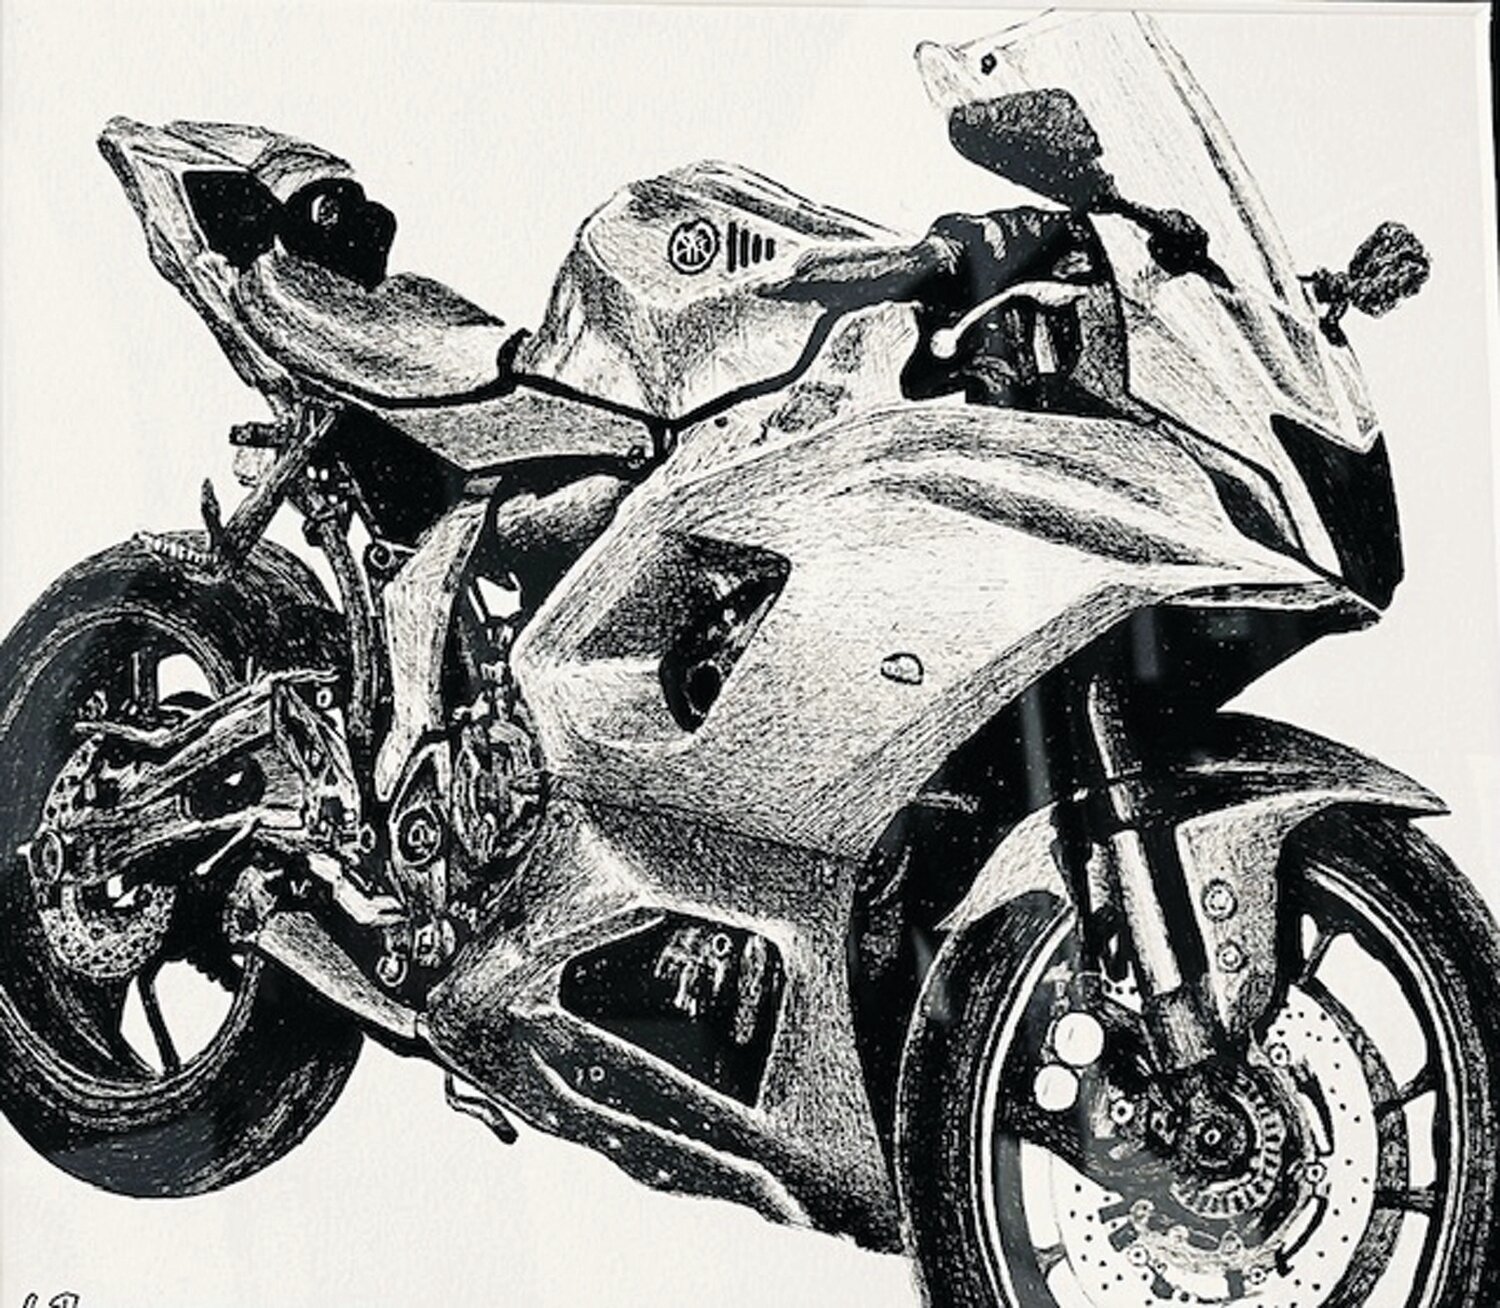 “Zoom Zoom” is a pen and ink drawing from Bristol Township/Truman High School artist Stephanie Duong.